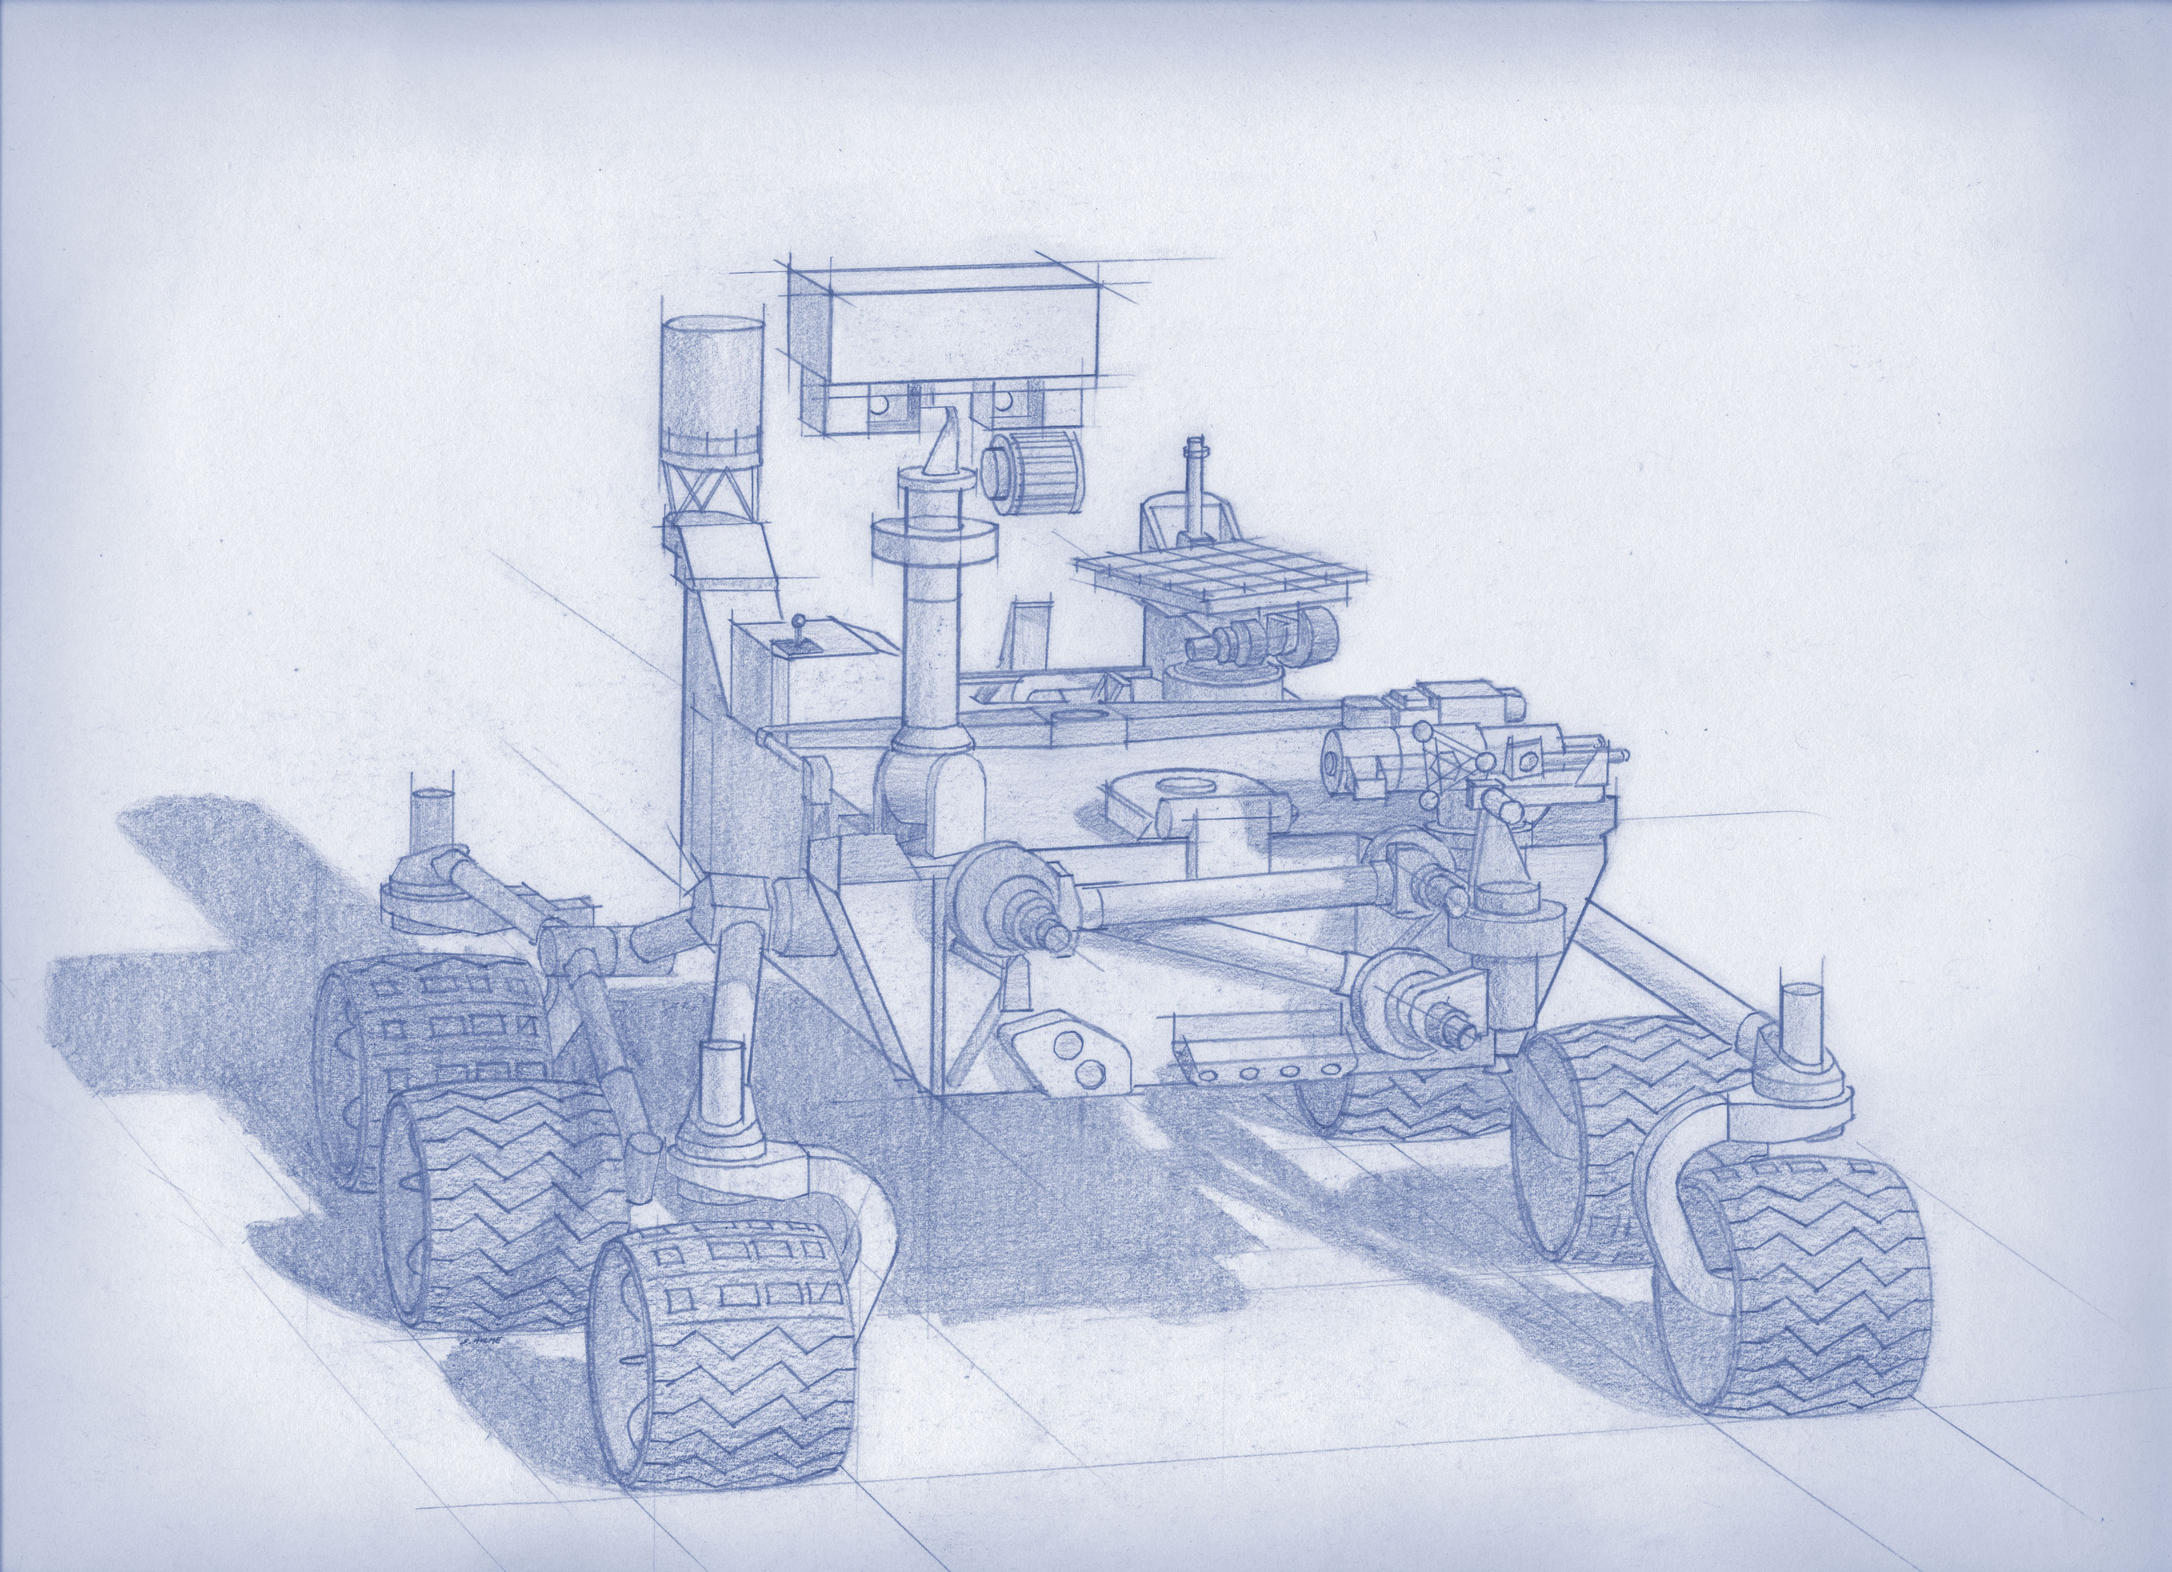 Planning for NASA's 2020 Mars rover envisions a basic structure that capitalizes on the design and engineering work done for the NASA rover Curiosity, which landed on Mars in 2012, but with new science instruments selected through competition for accomplishing different science objectives.